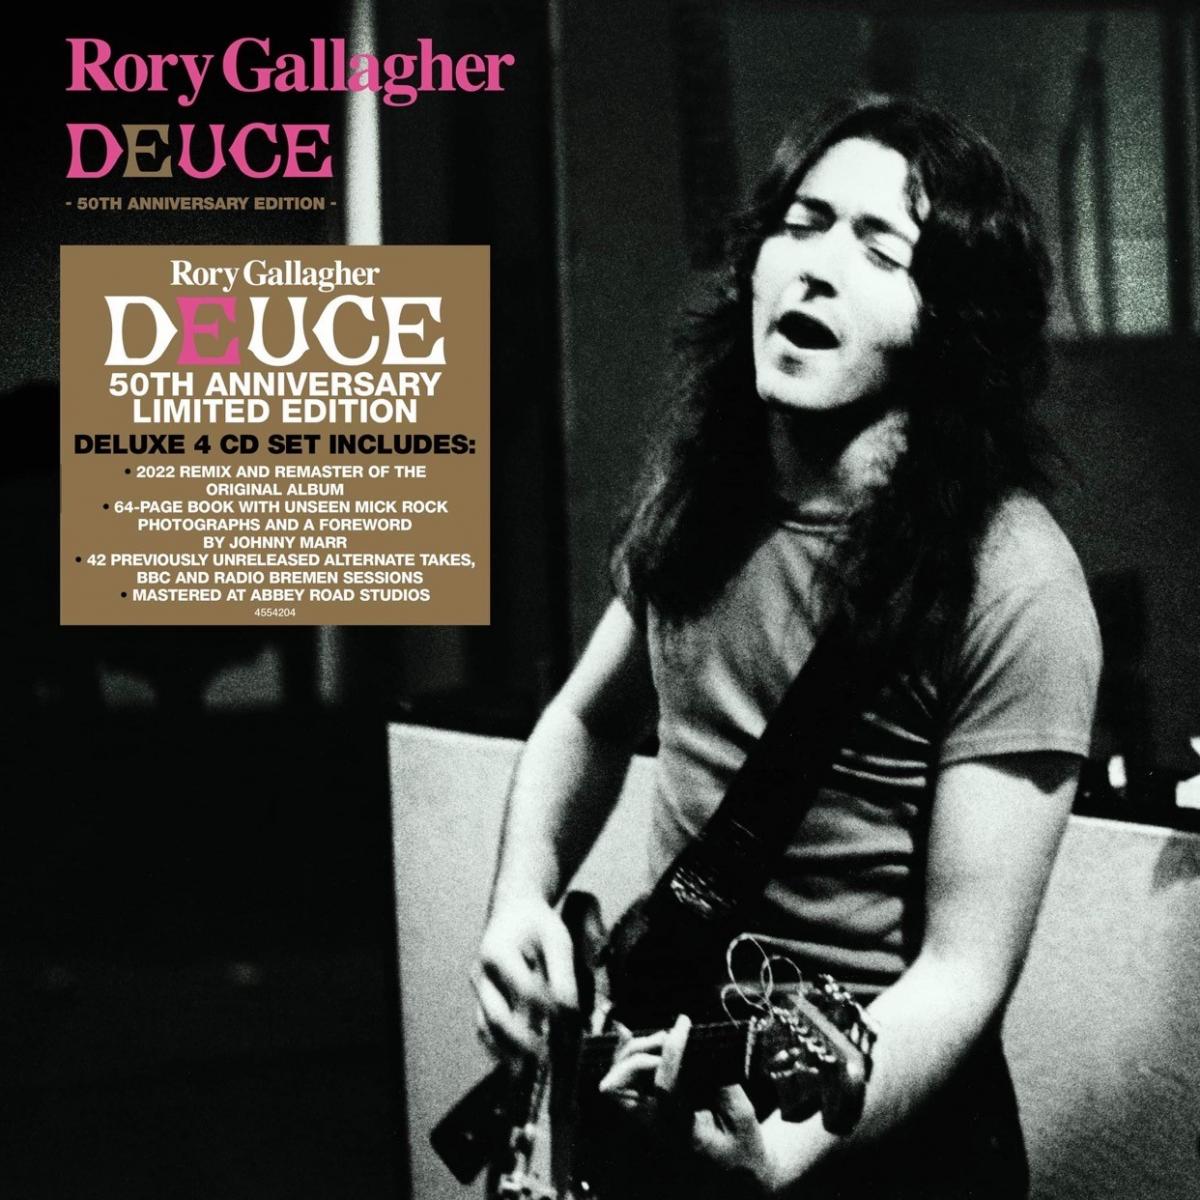 Rory Gallagher releases two rare tracks from 'Deuce' 50th Anniversary Edition Deluxe Boxset